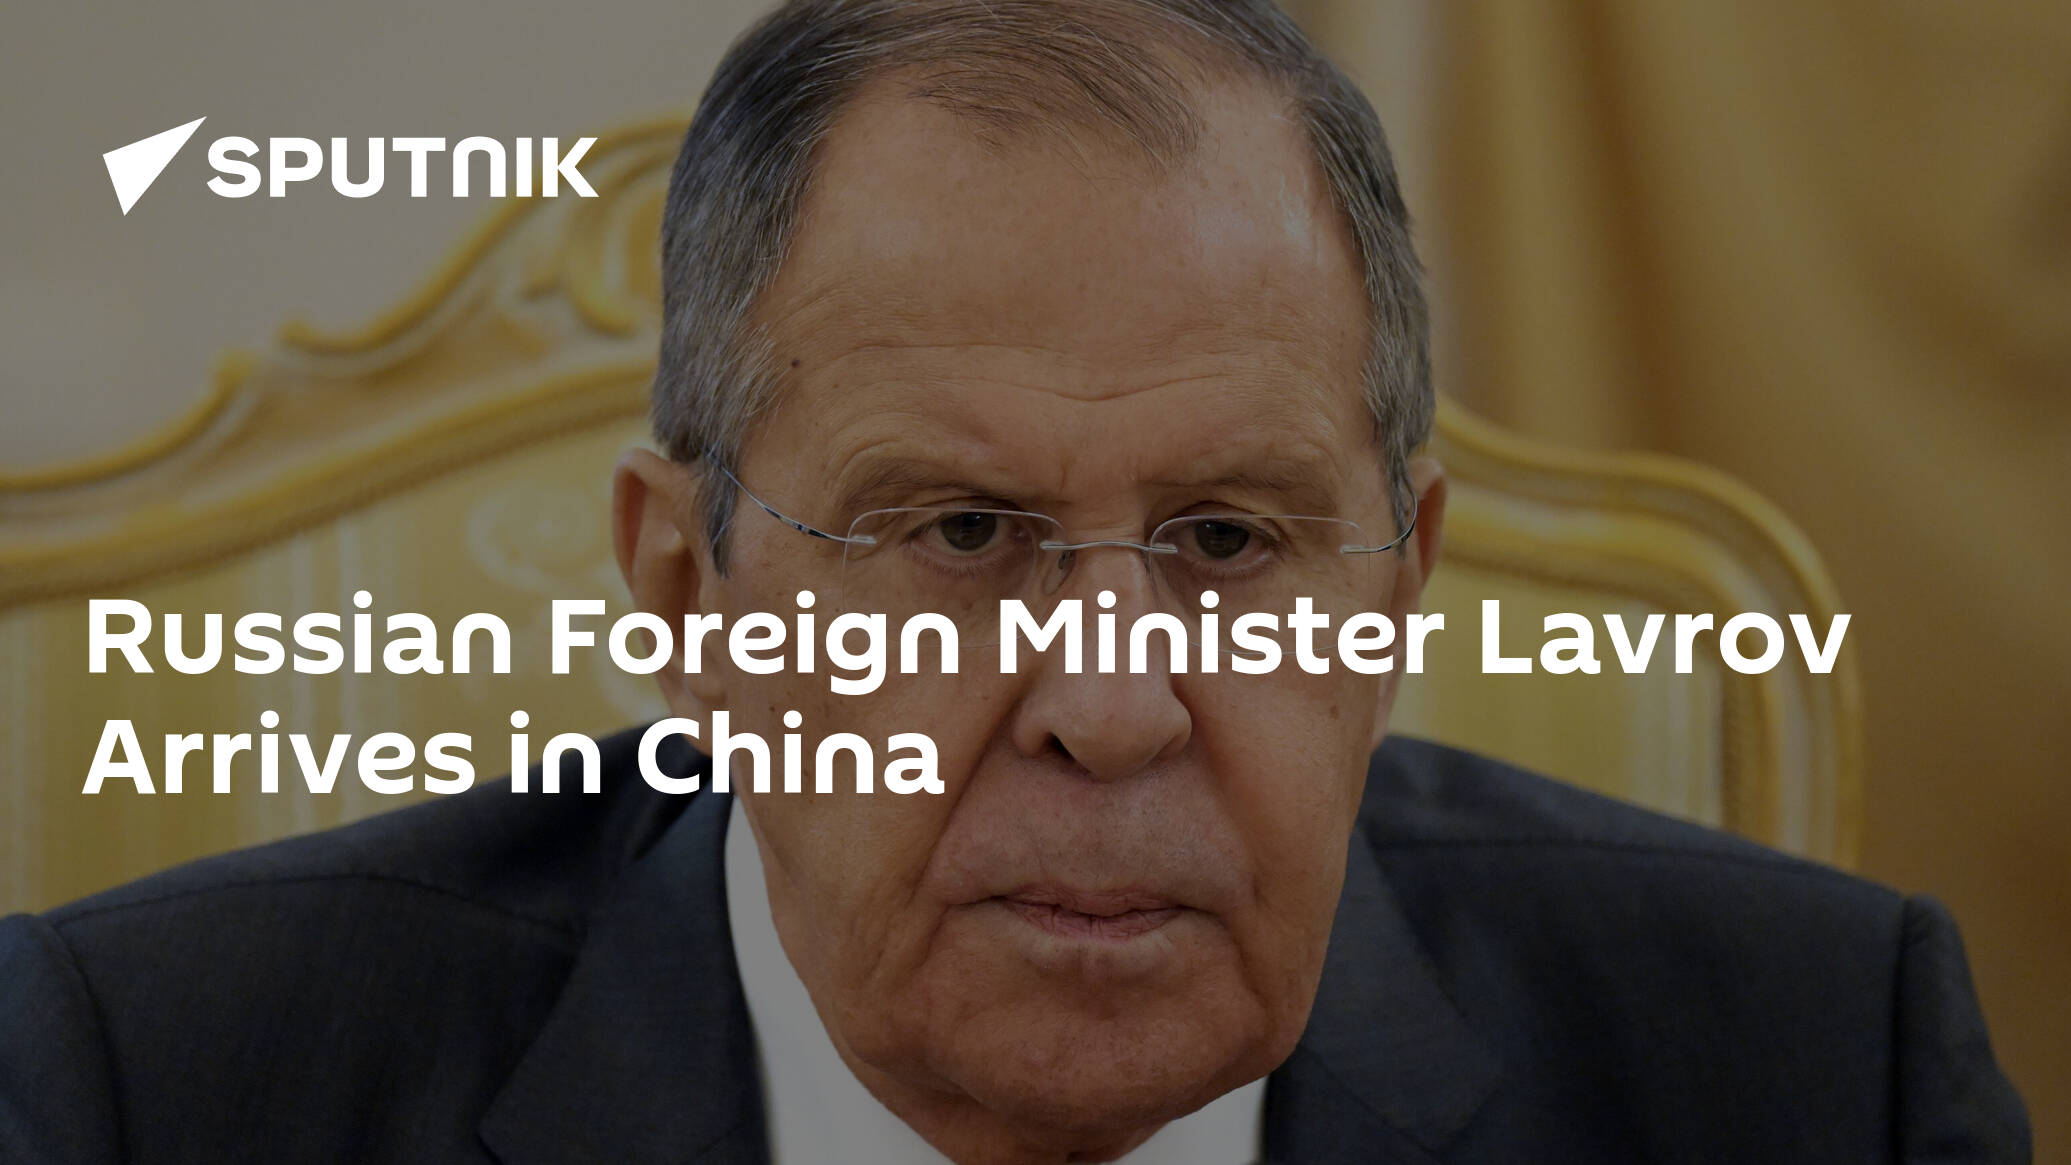 Russian Foreign Minister Lavrov Arrives in China